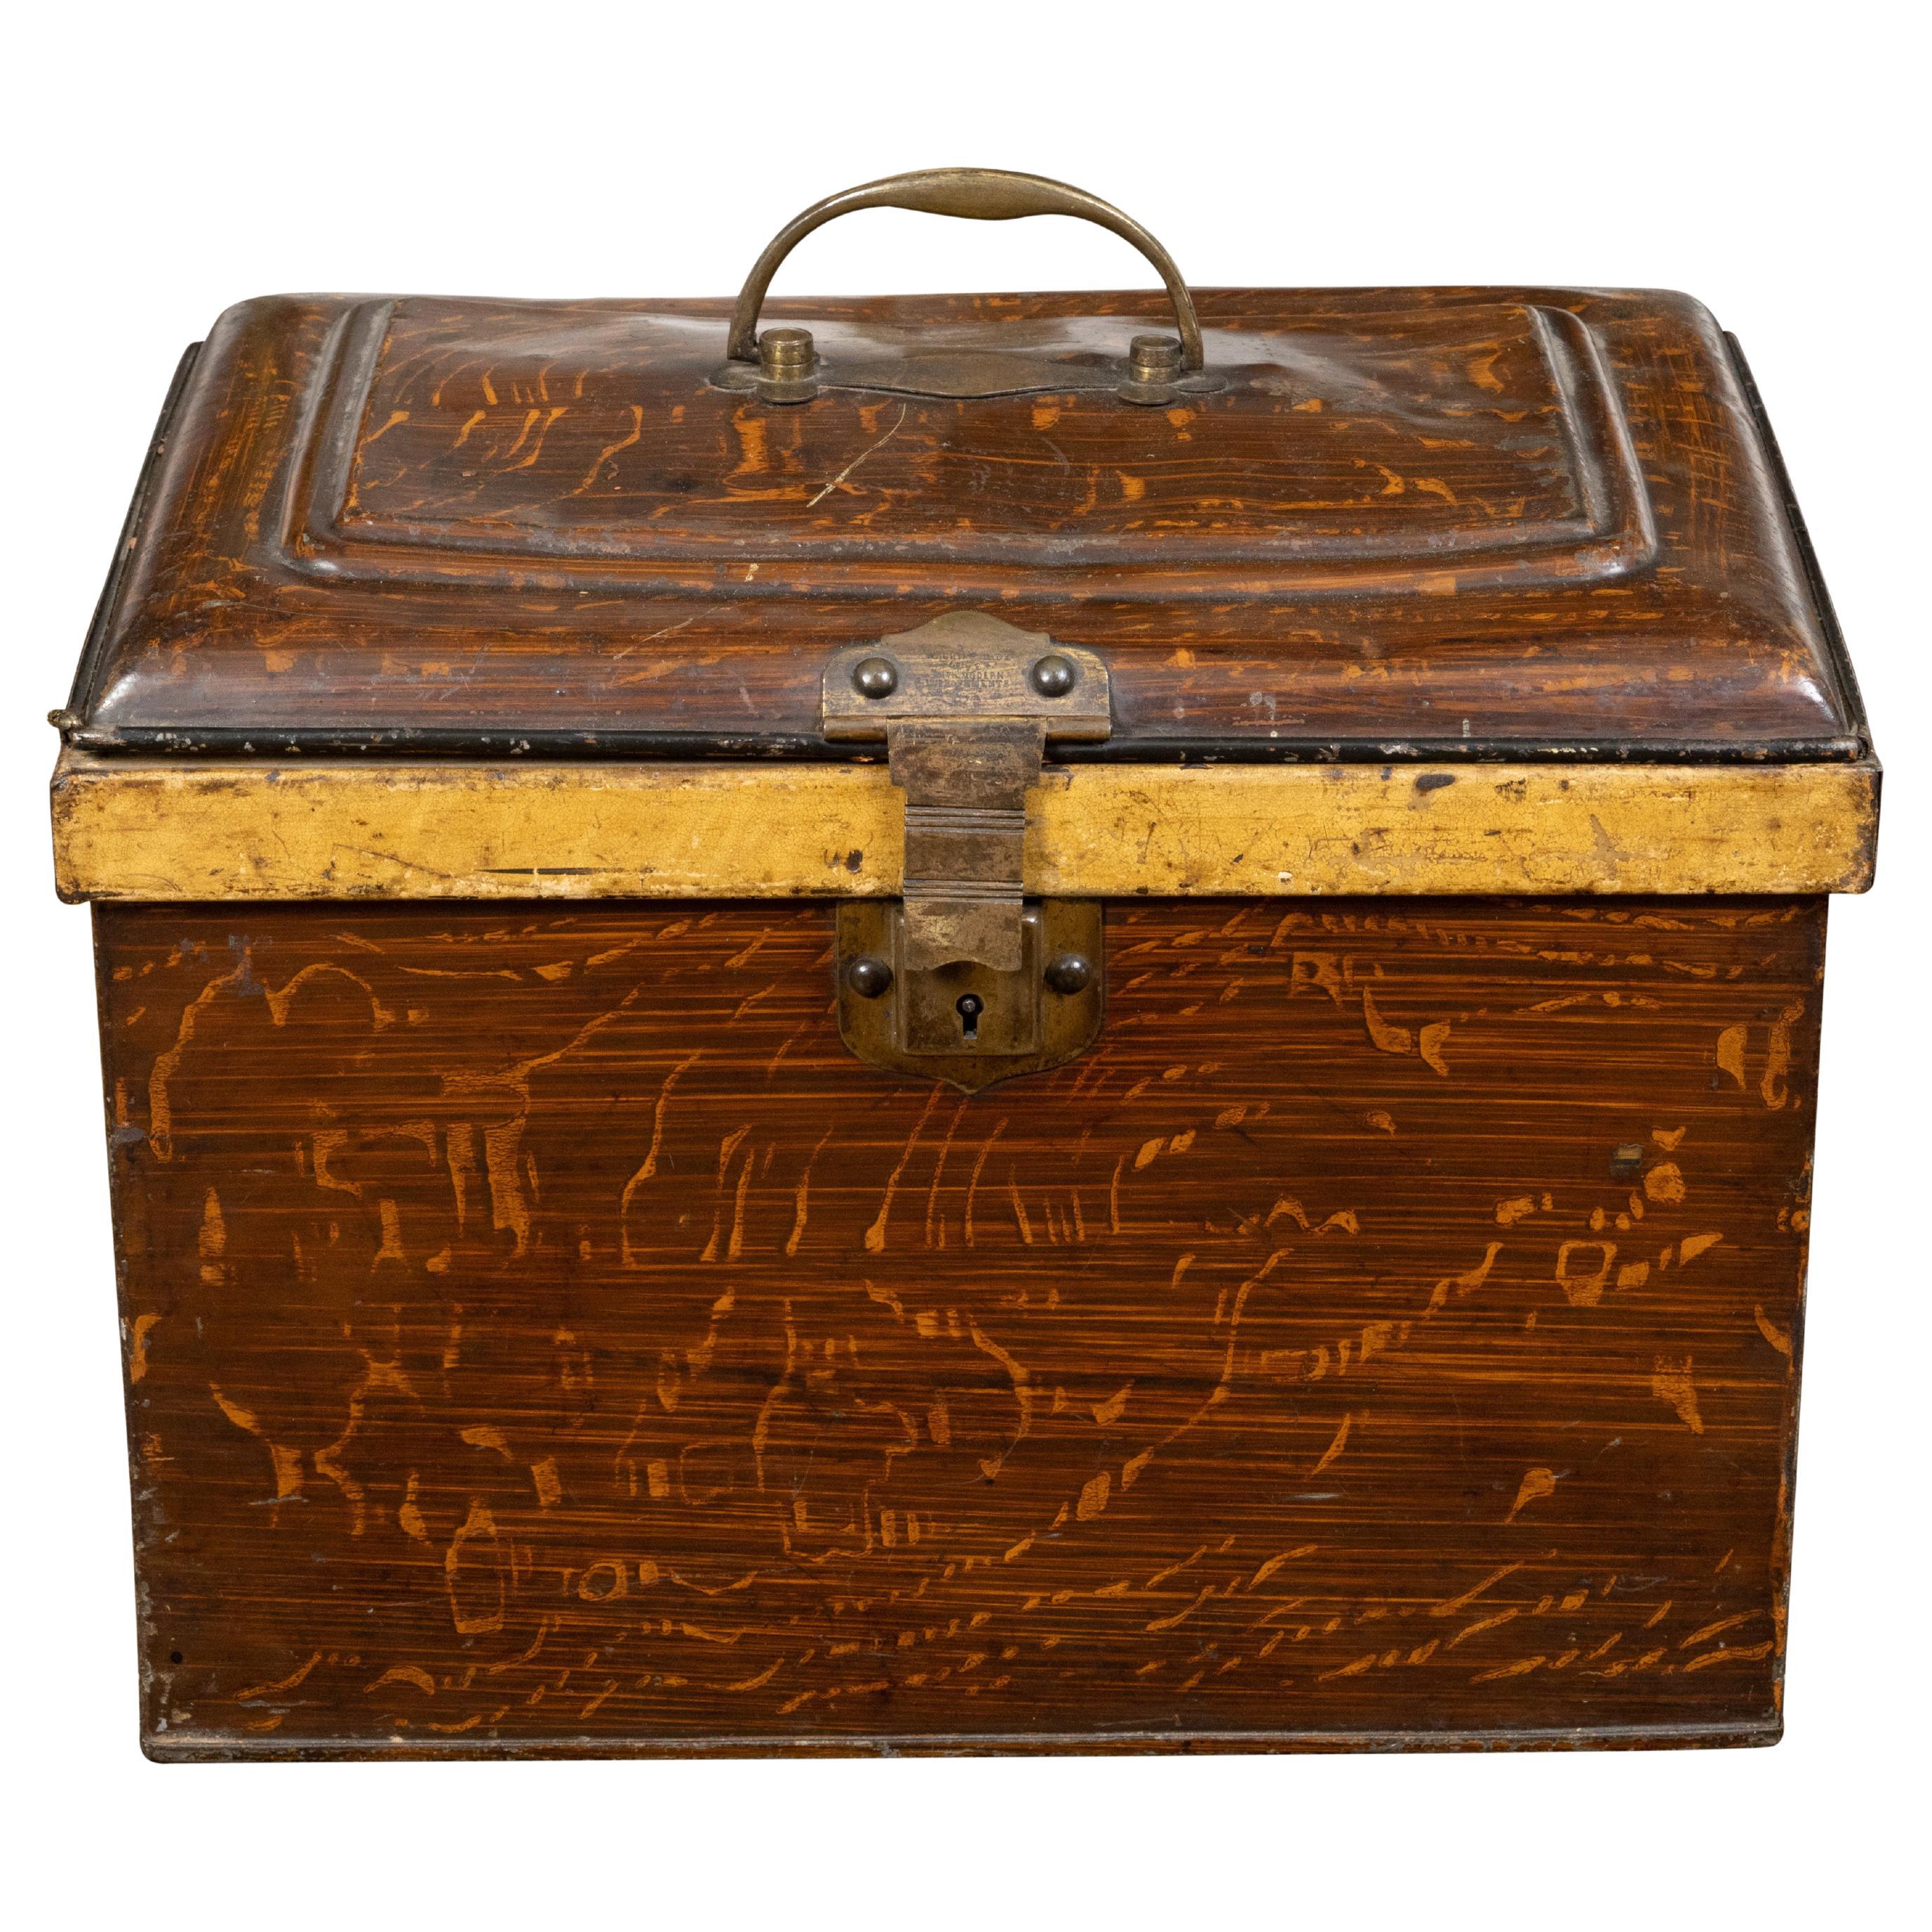 French 1890s Rustic Painted Tôle Box with Wood Grain Finish and Goldenrod Accent For Sale